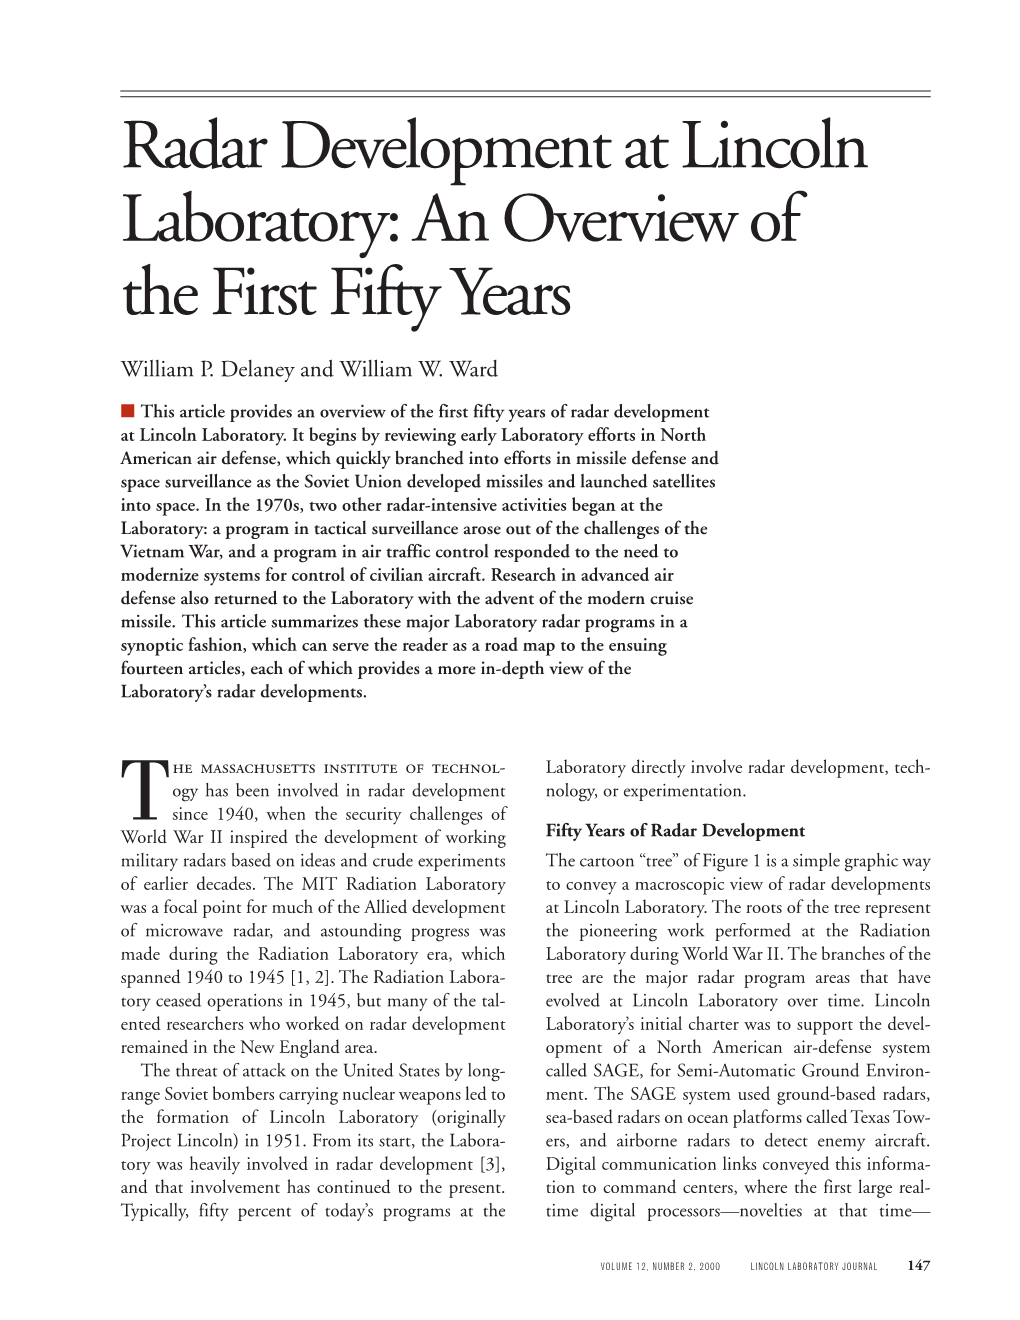 Radar Development at Lincoln Laboratory: an Overview of the First Fifty Years Radar Development at Lincoln Laboratory: an Overview of the First Fifty Years